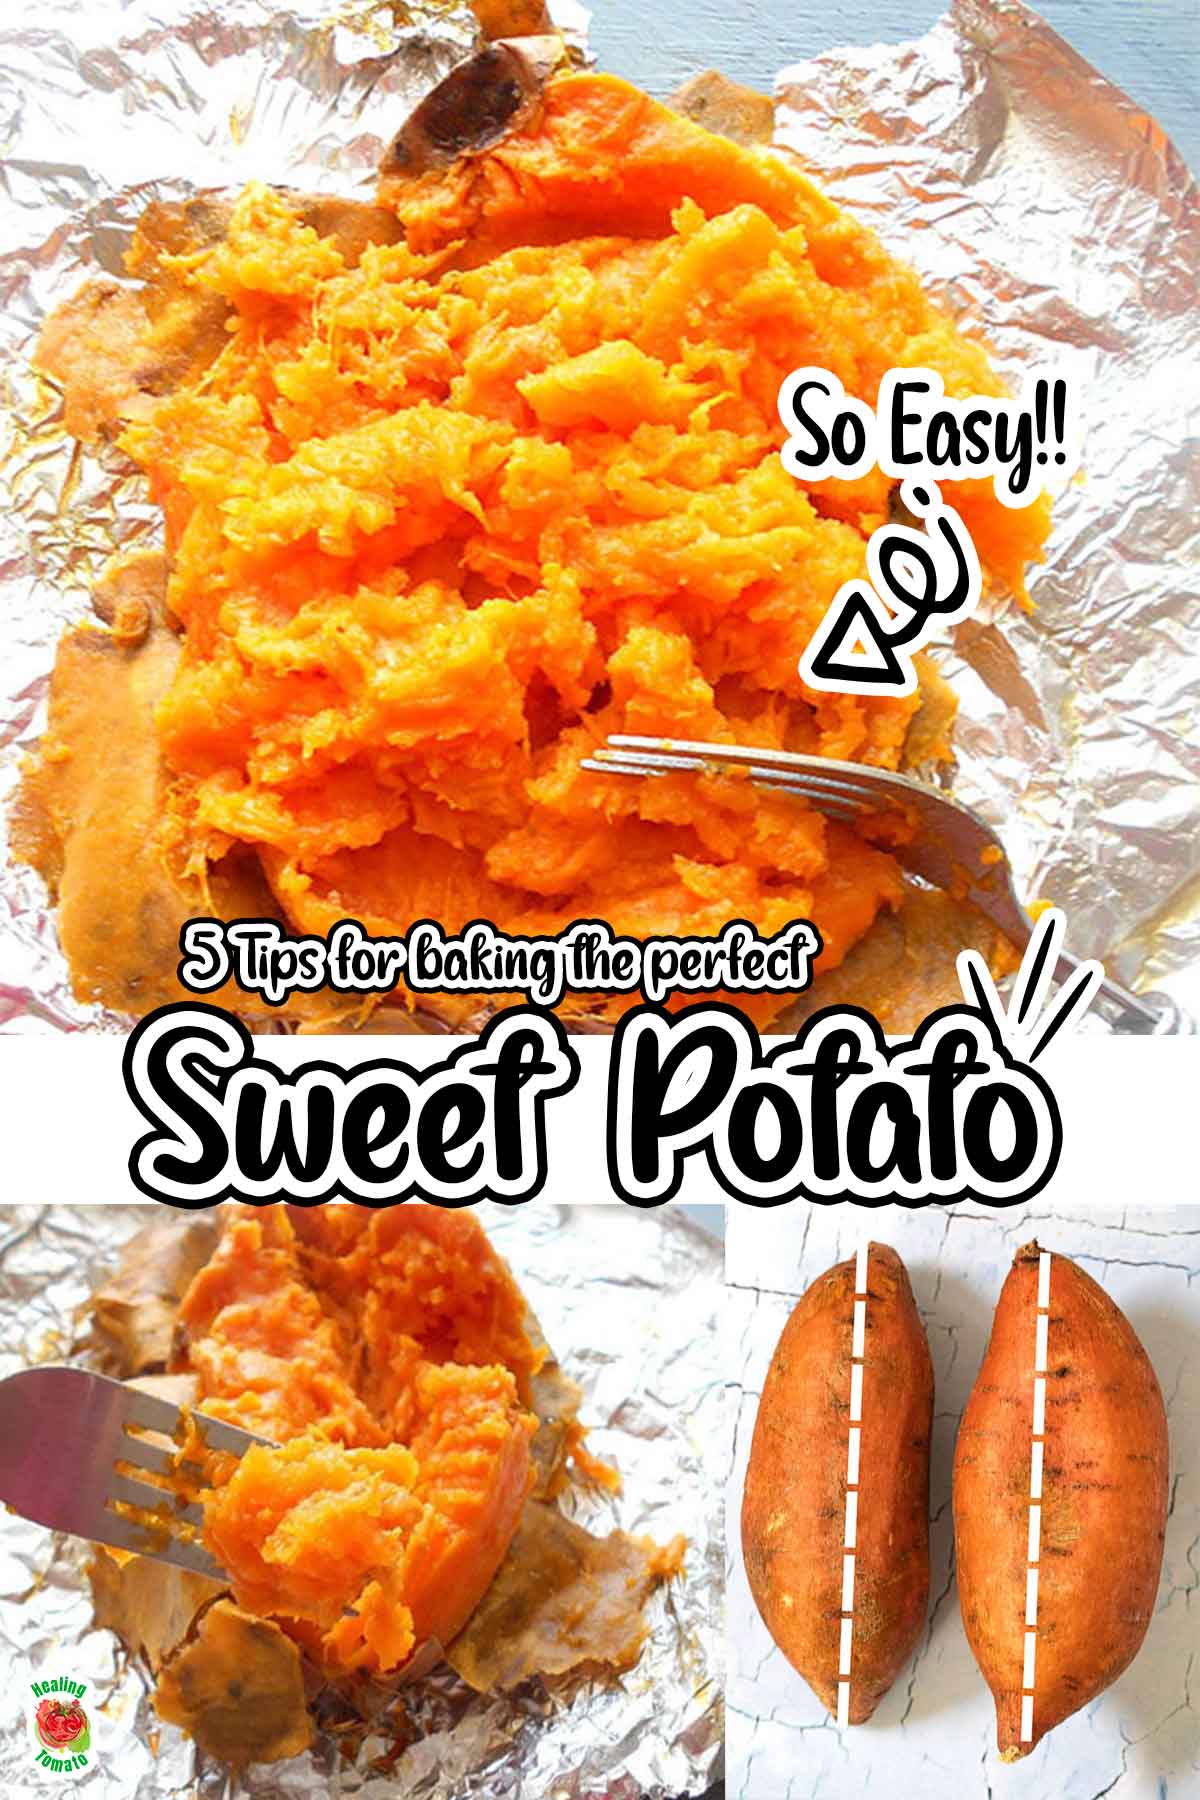 Top view of a collage of 3 images of baked sweet potato